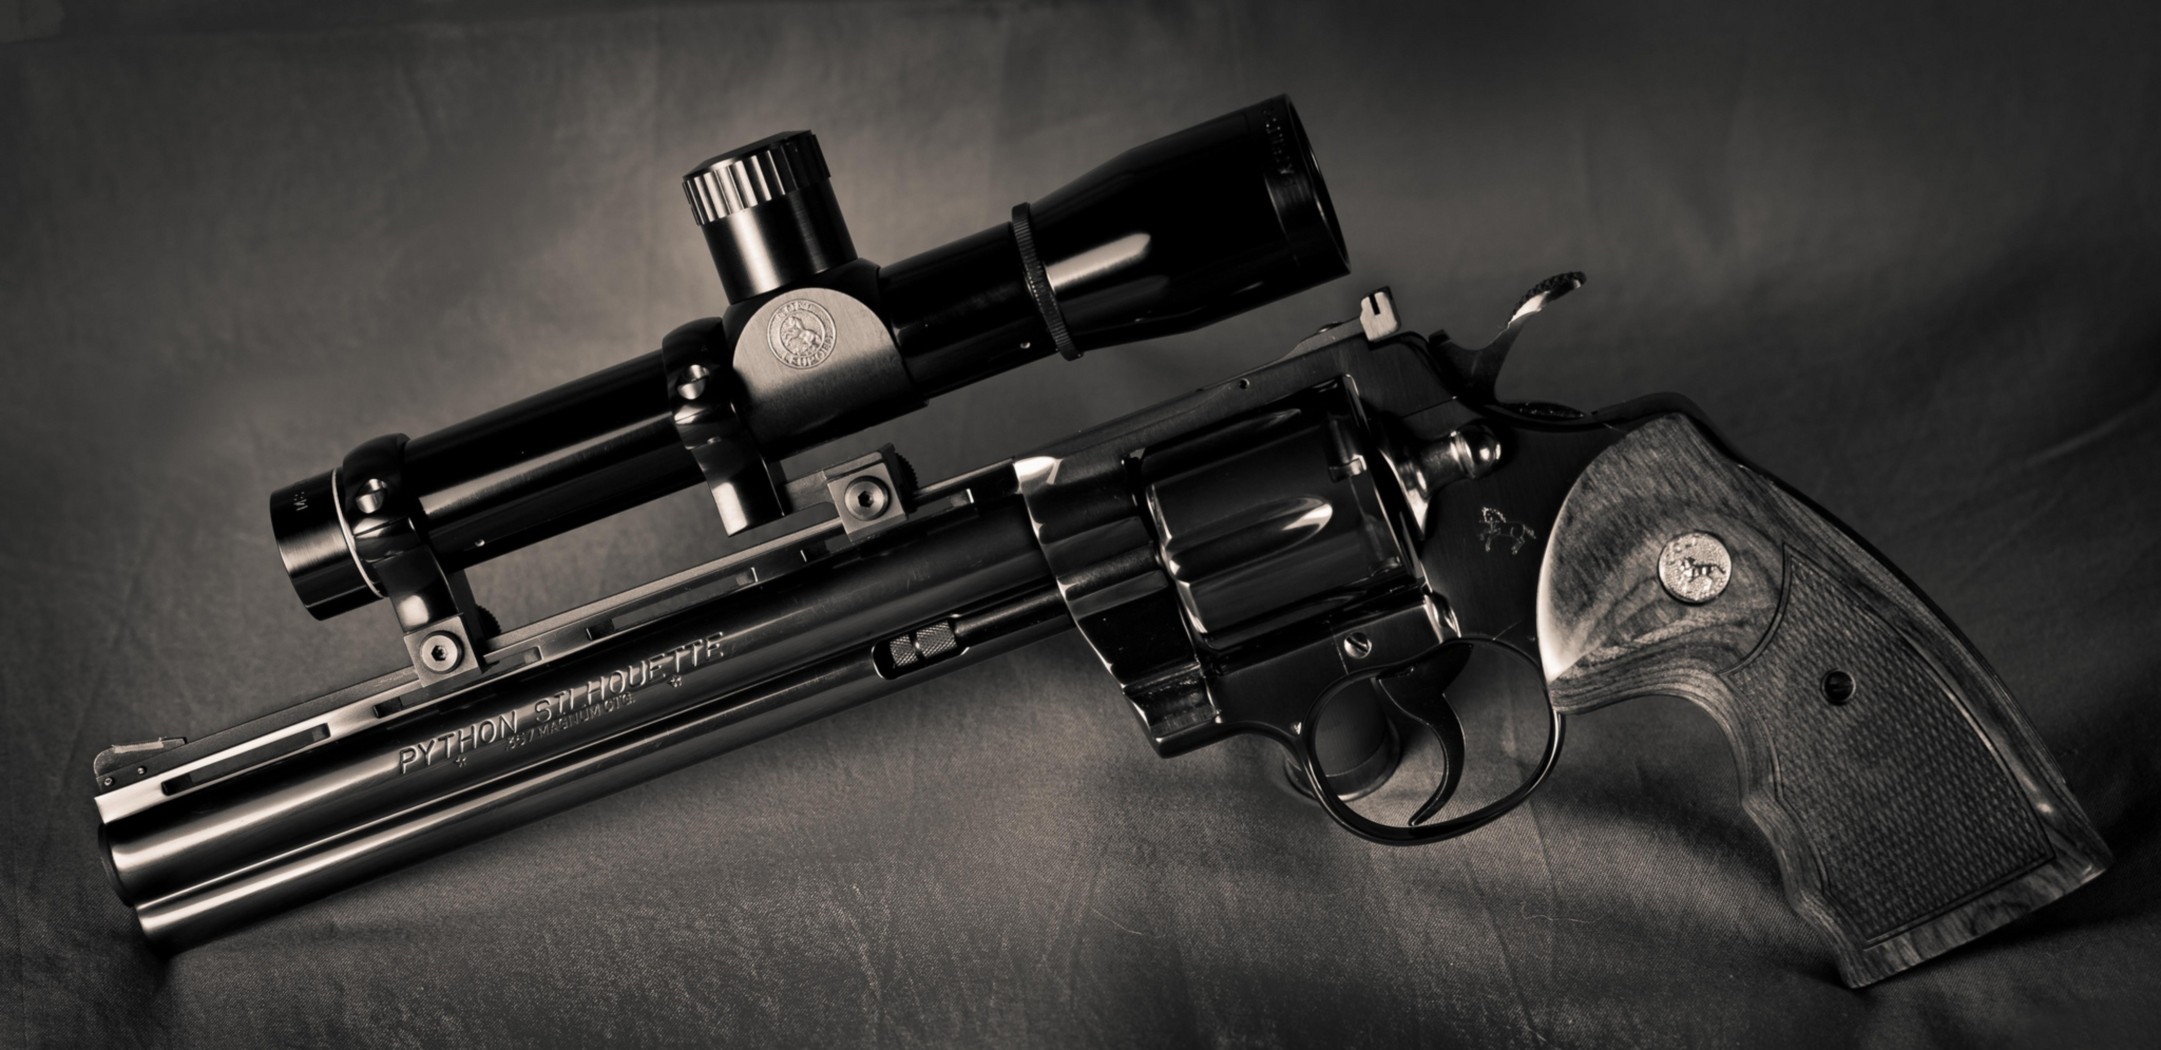 1 Colt Python Silhouette Revolver HD Wallpapers | Backgrounds ...